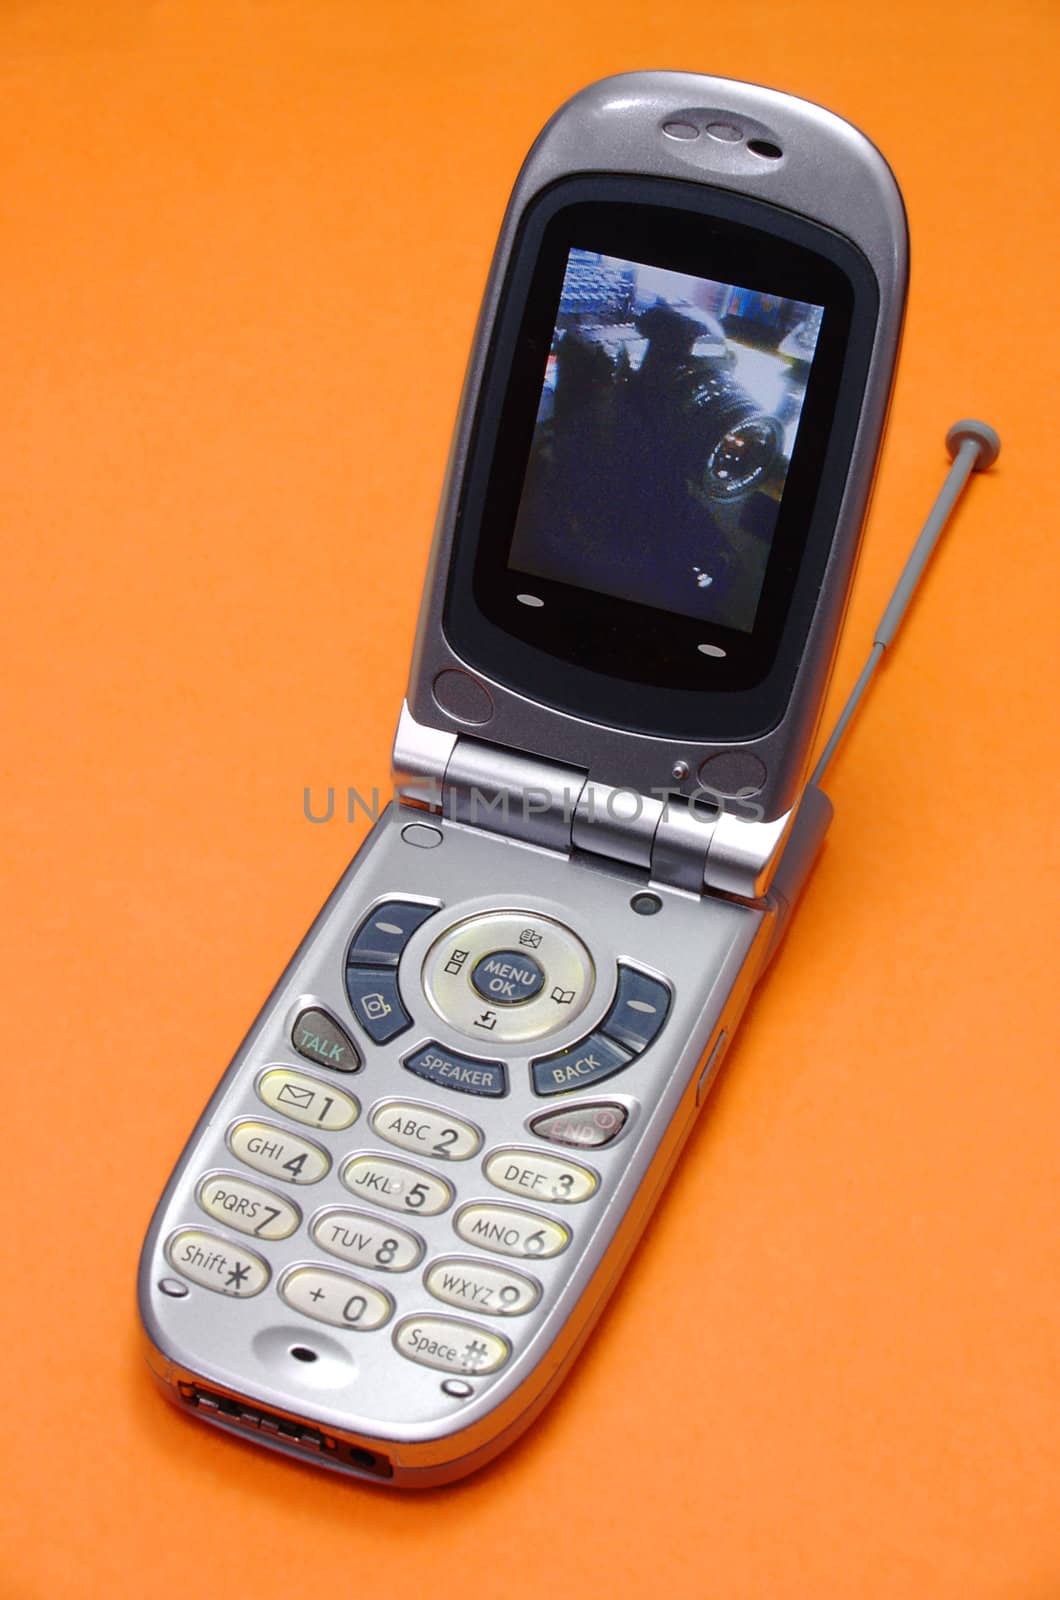 A silver, flip-type cellphone, opened and showing a photo of an SLR camera on it's screen. The phone is laid against a bright orange backdrop.